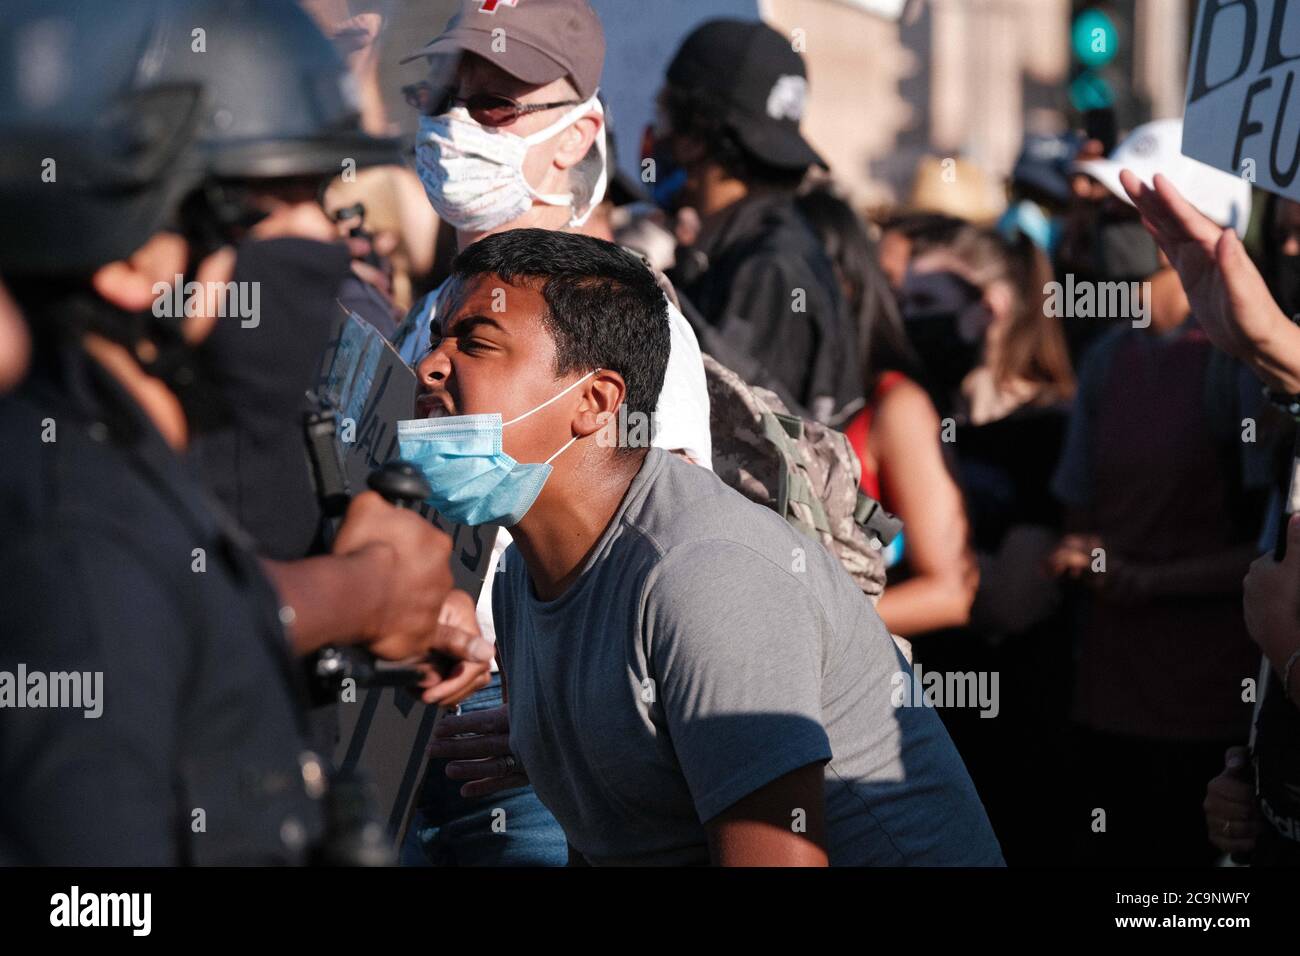 3. Protestor at the entrance of the 101 freeway. LAPD had formed a line, blocking only one side of the ramps. Stock Photo